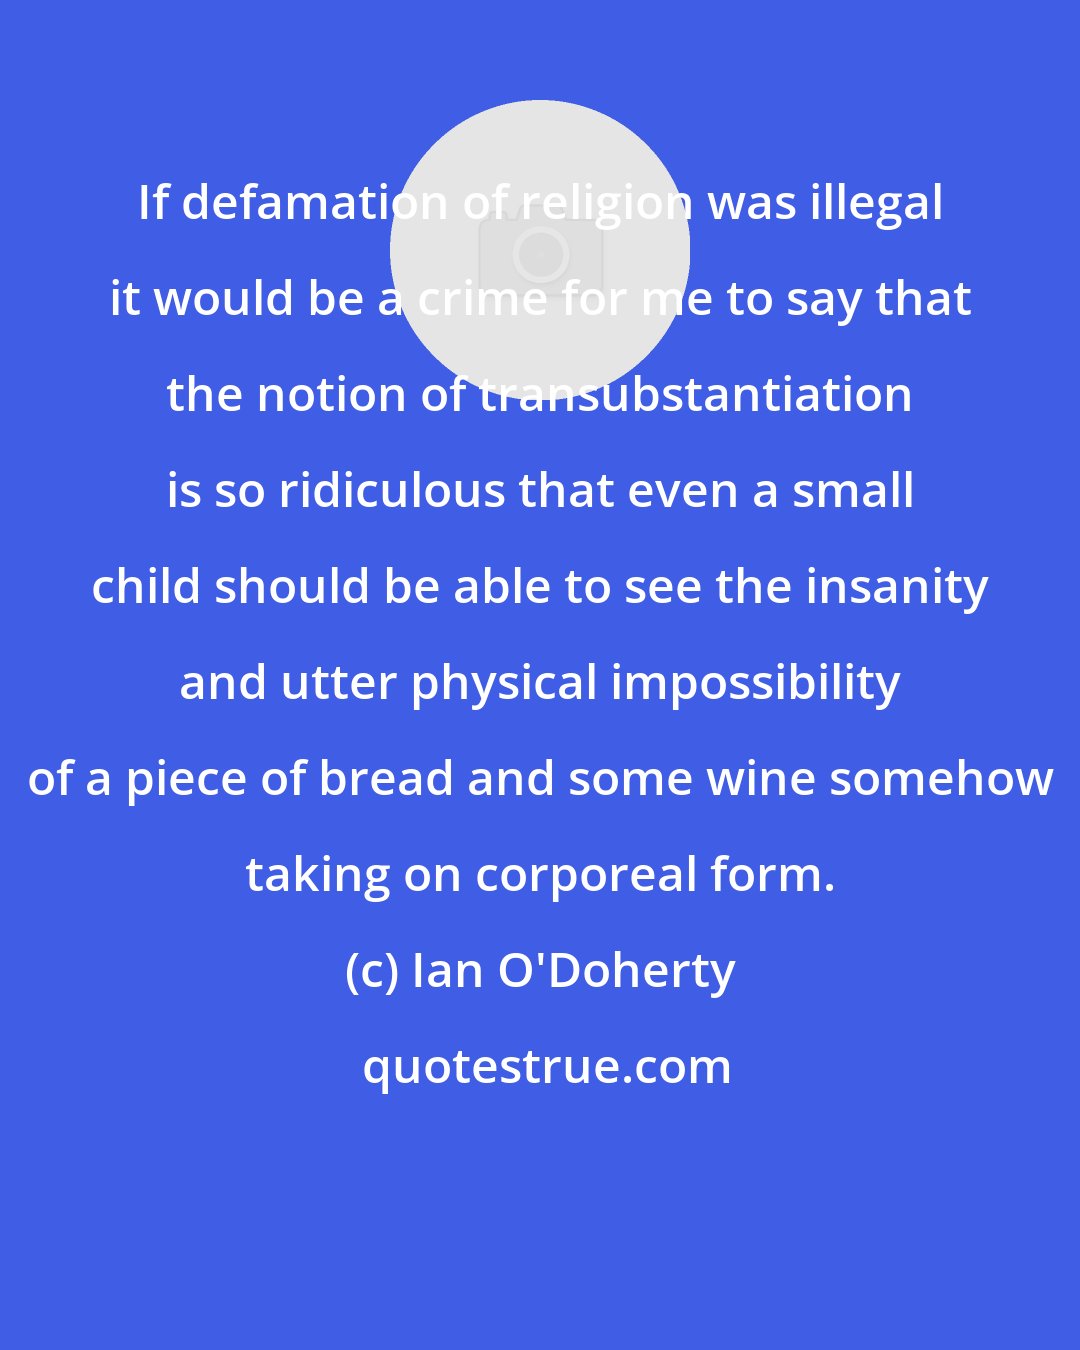 Ian O'Doherty: If defamation of religion was illegal it would be a crime for me to say that the notion of transubstantiation is so ridiculous that even a small child should be able to see the insanity and utter physical impossibility of a piece of bread and some wine somehow taking on corporeal form.